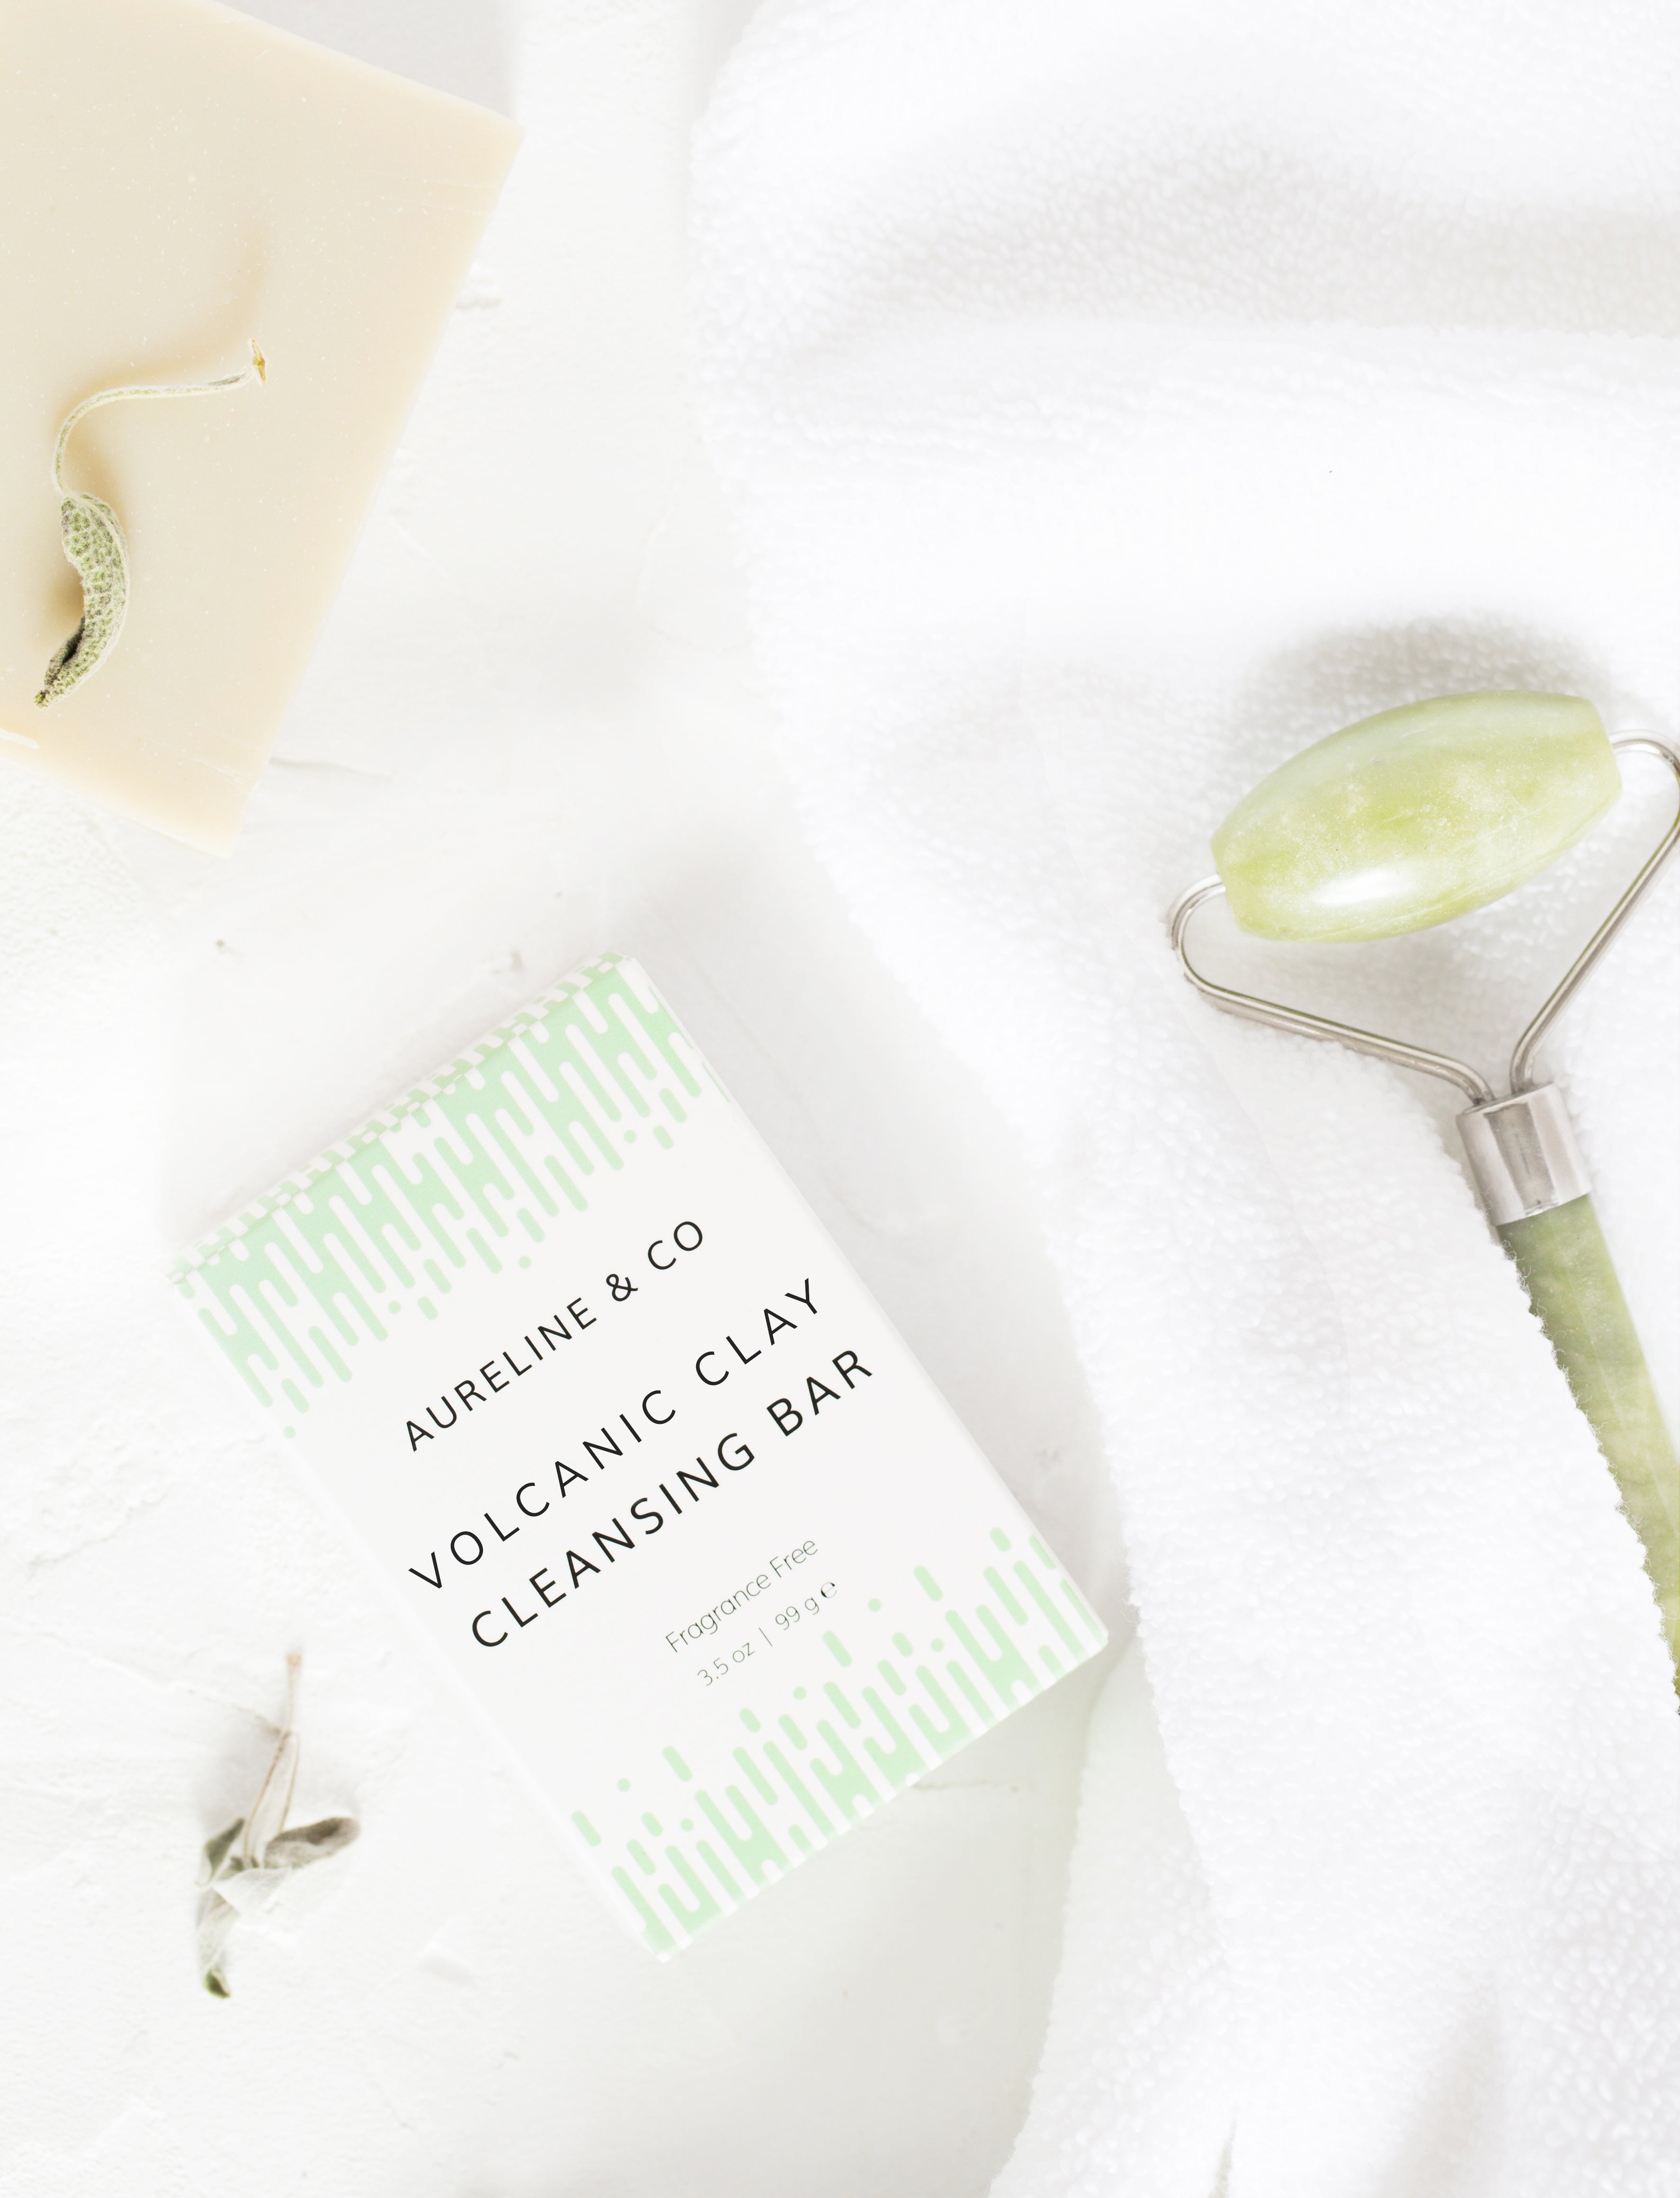 Volcanic Clay Cleansing Bar